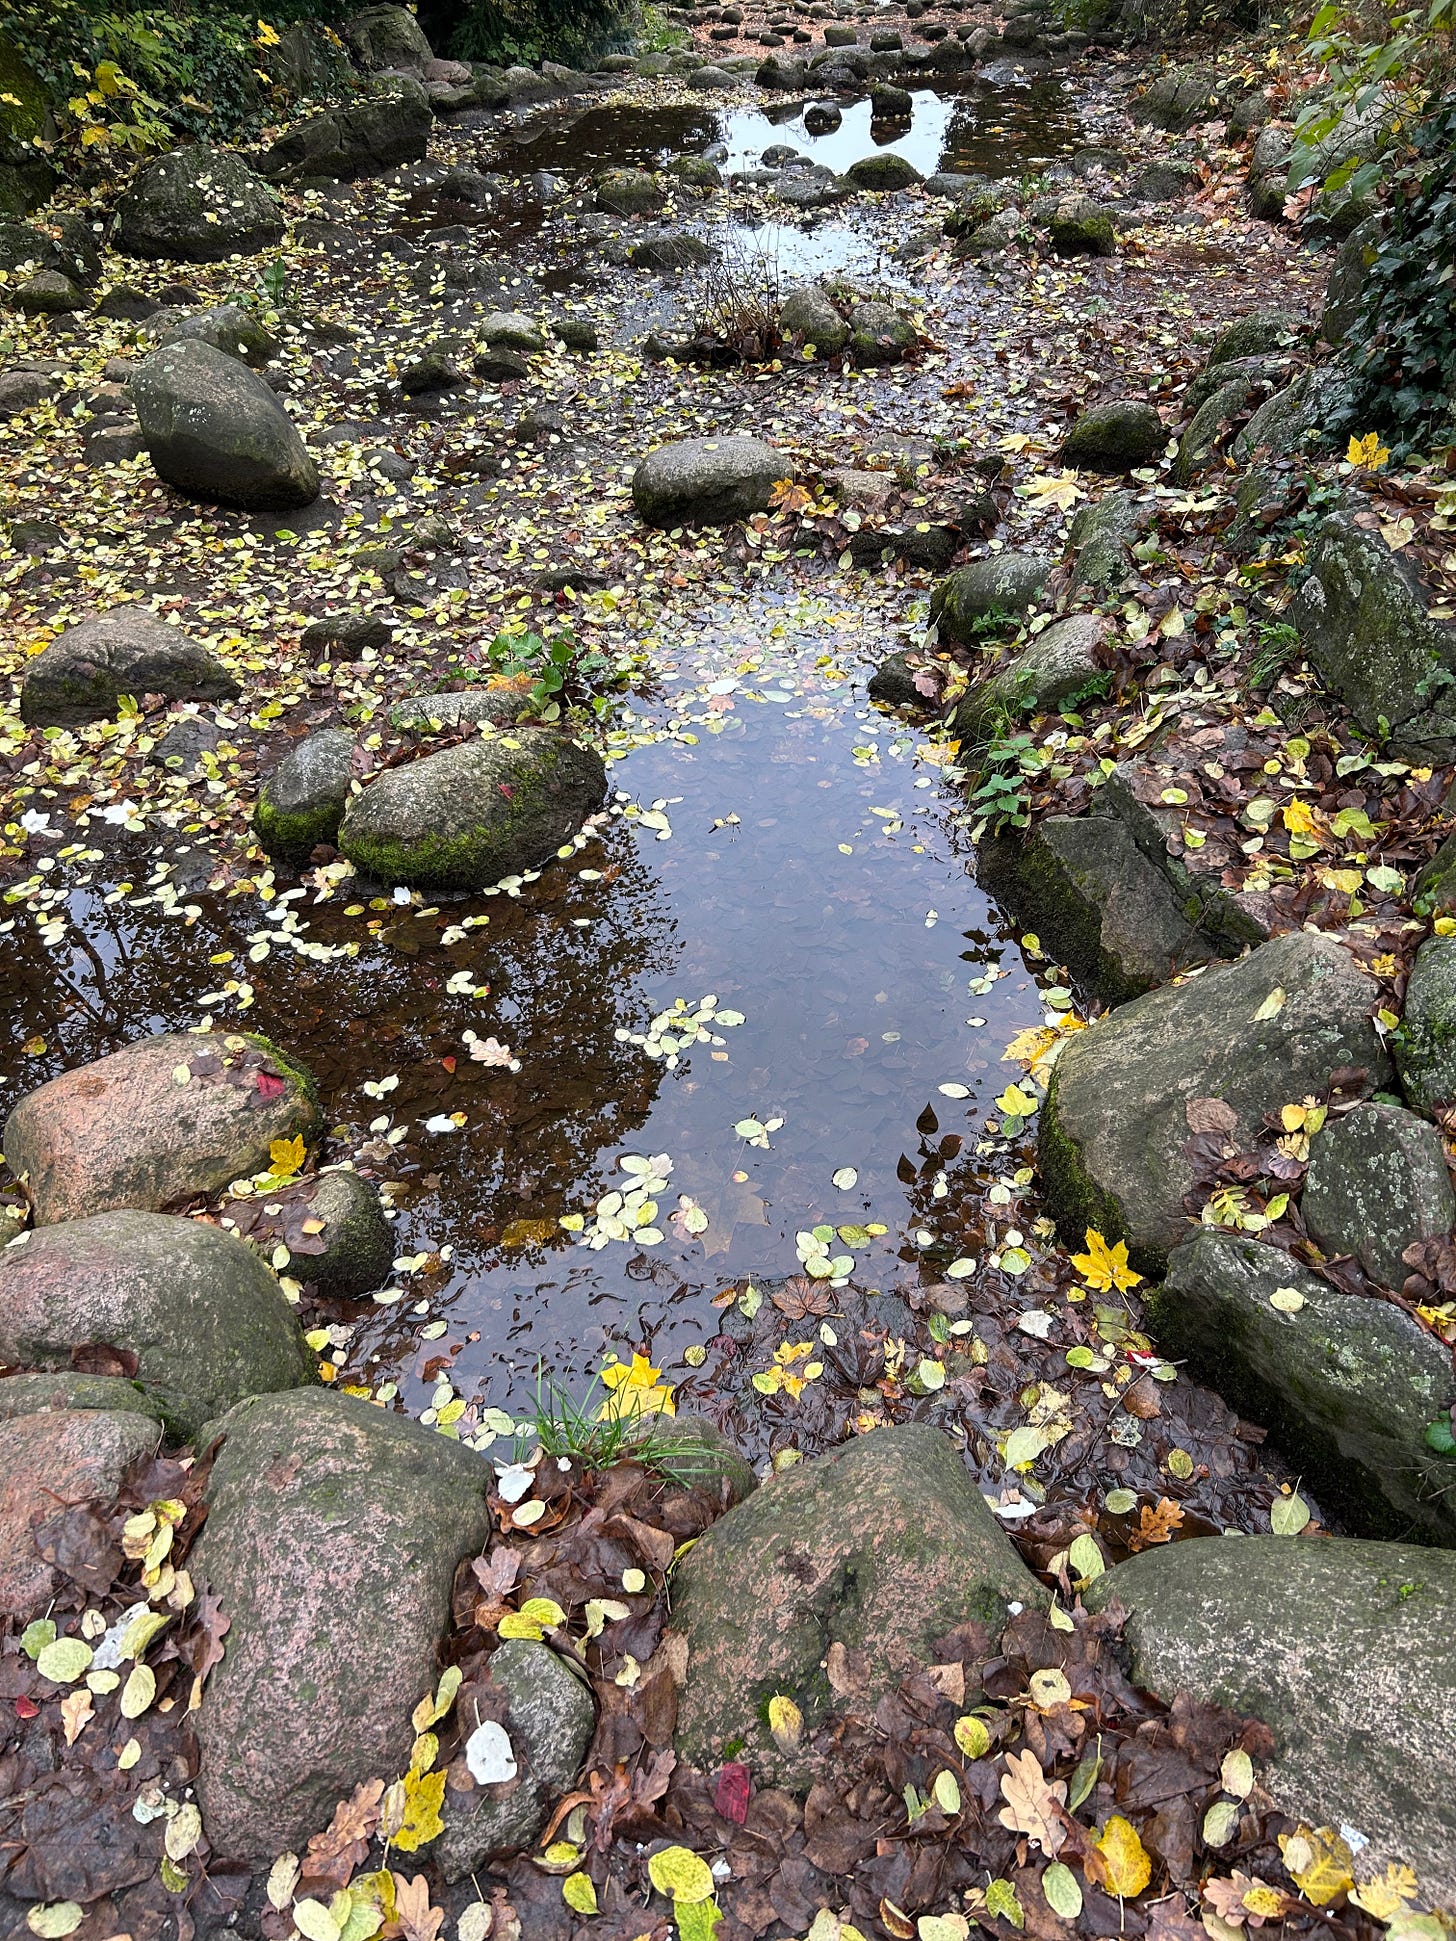 a picture of a reflective puddle among rocks with yellow autumn leaves both around and in it